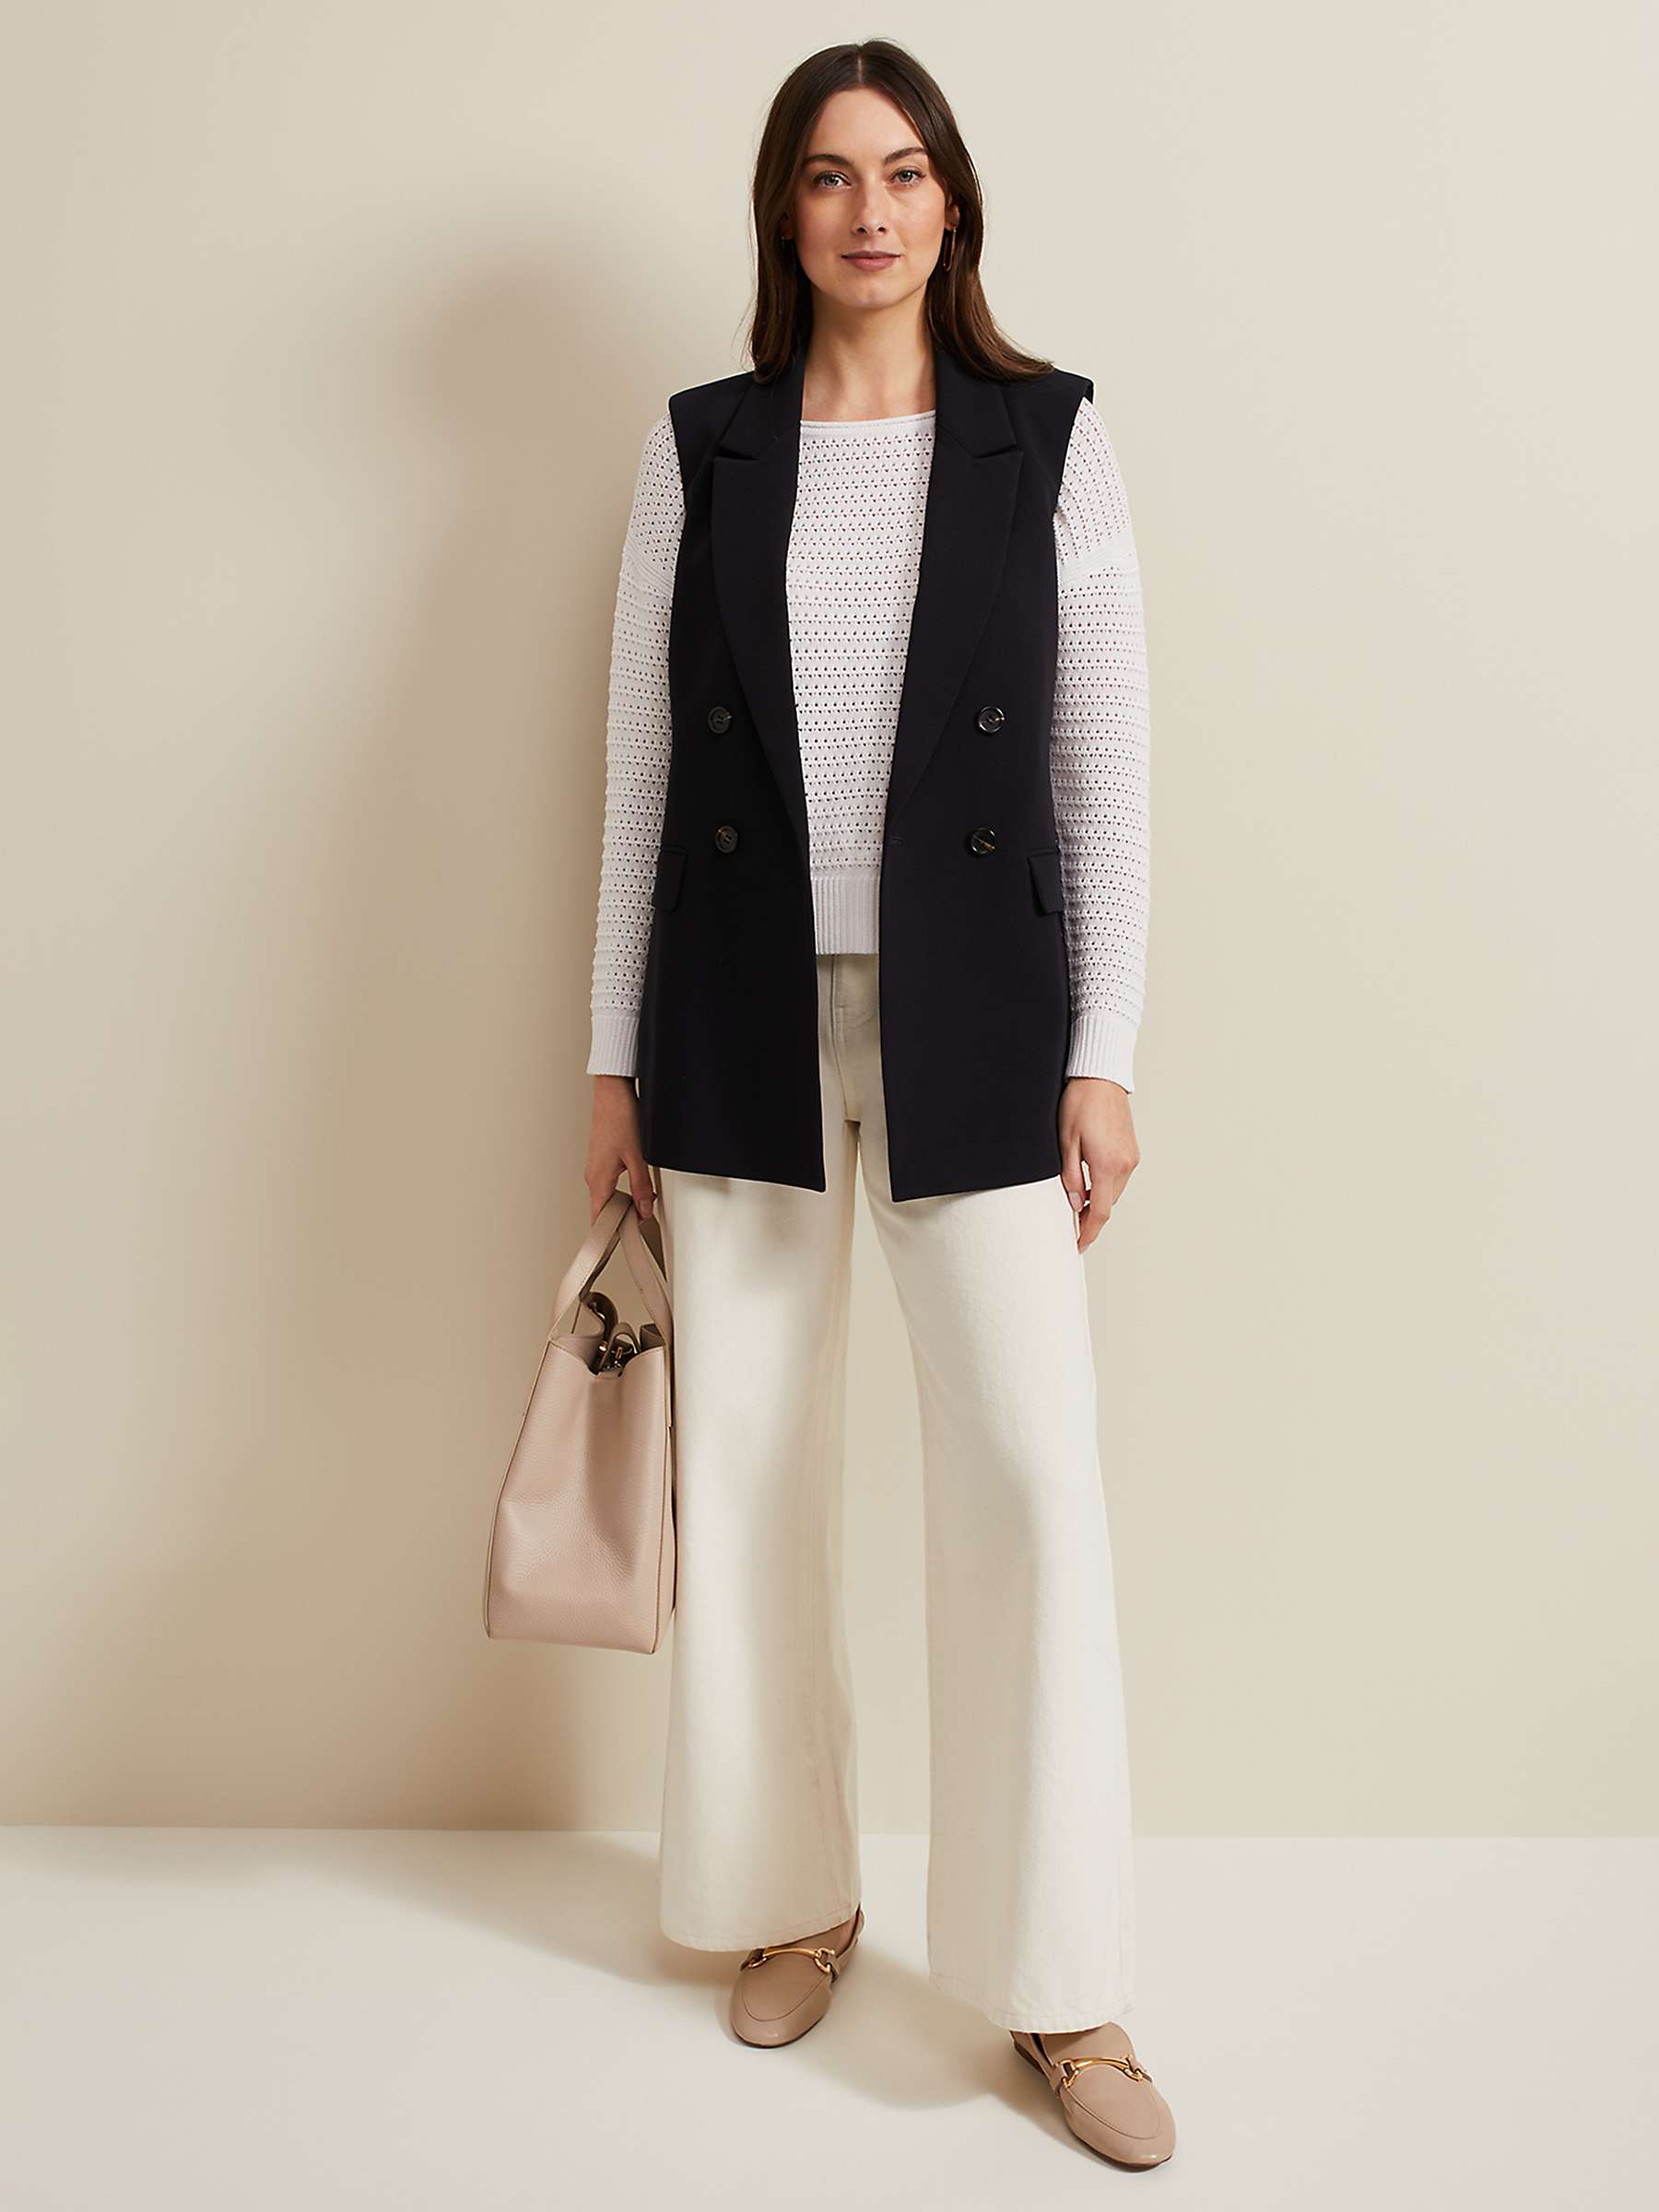 Buy Phase Eight Annie Jumper, Ivory Online at johnlewis.com